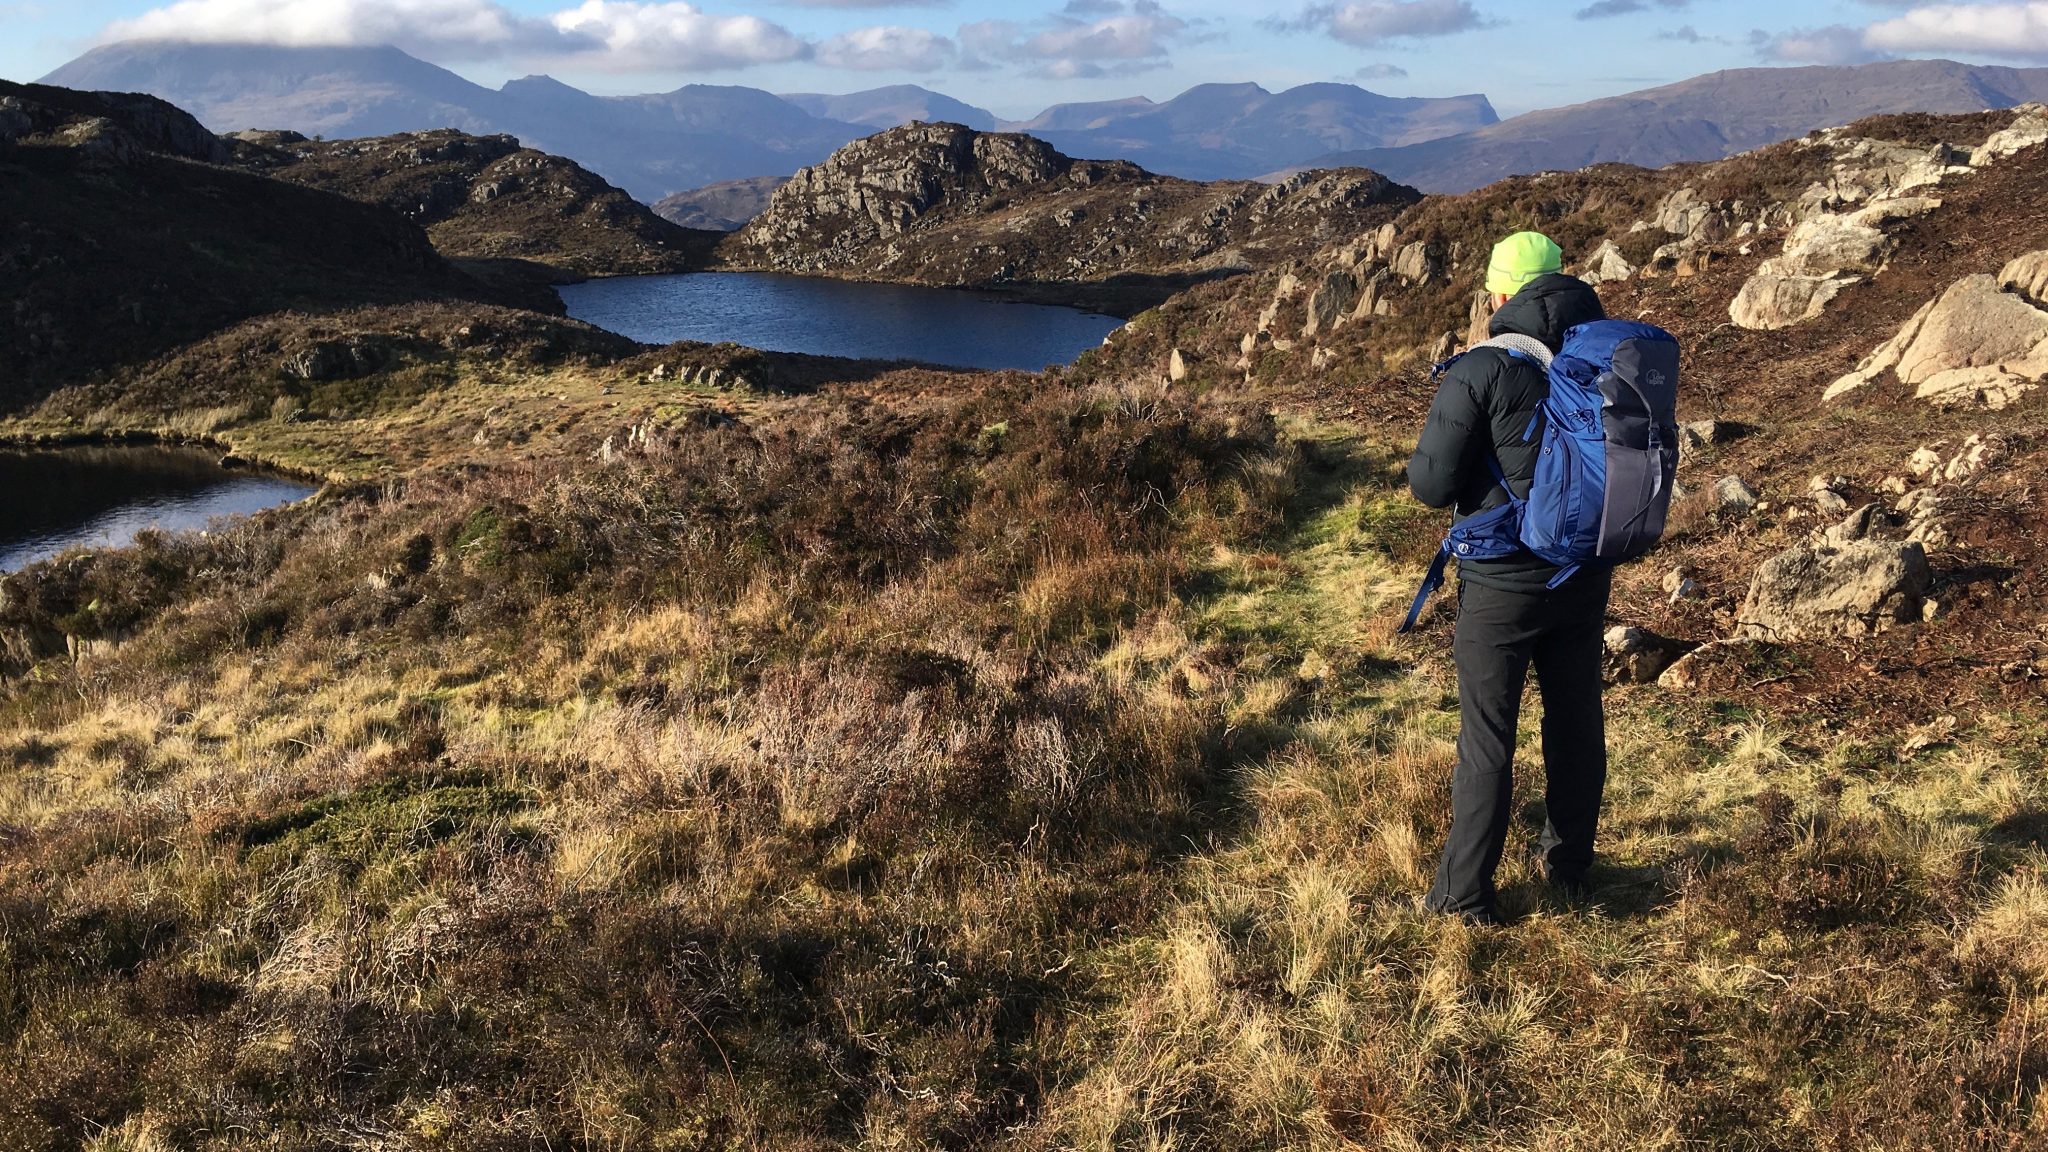 A student learns to read contour lines during one of our mountain navigation courses in Snowdonia